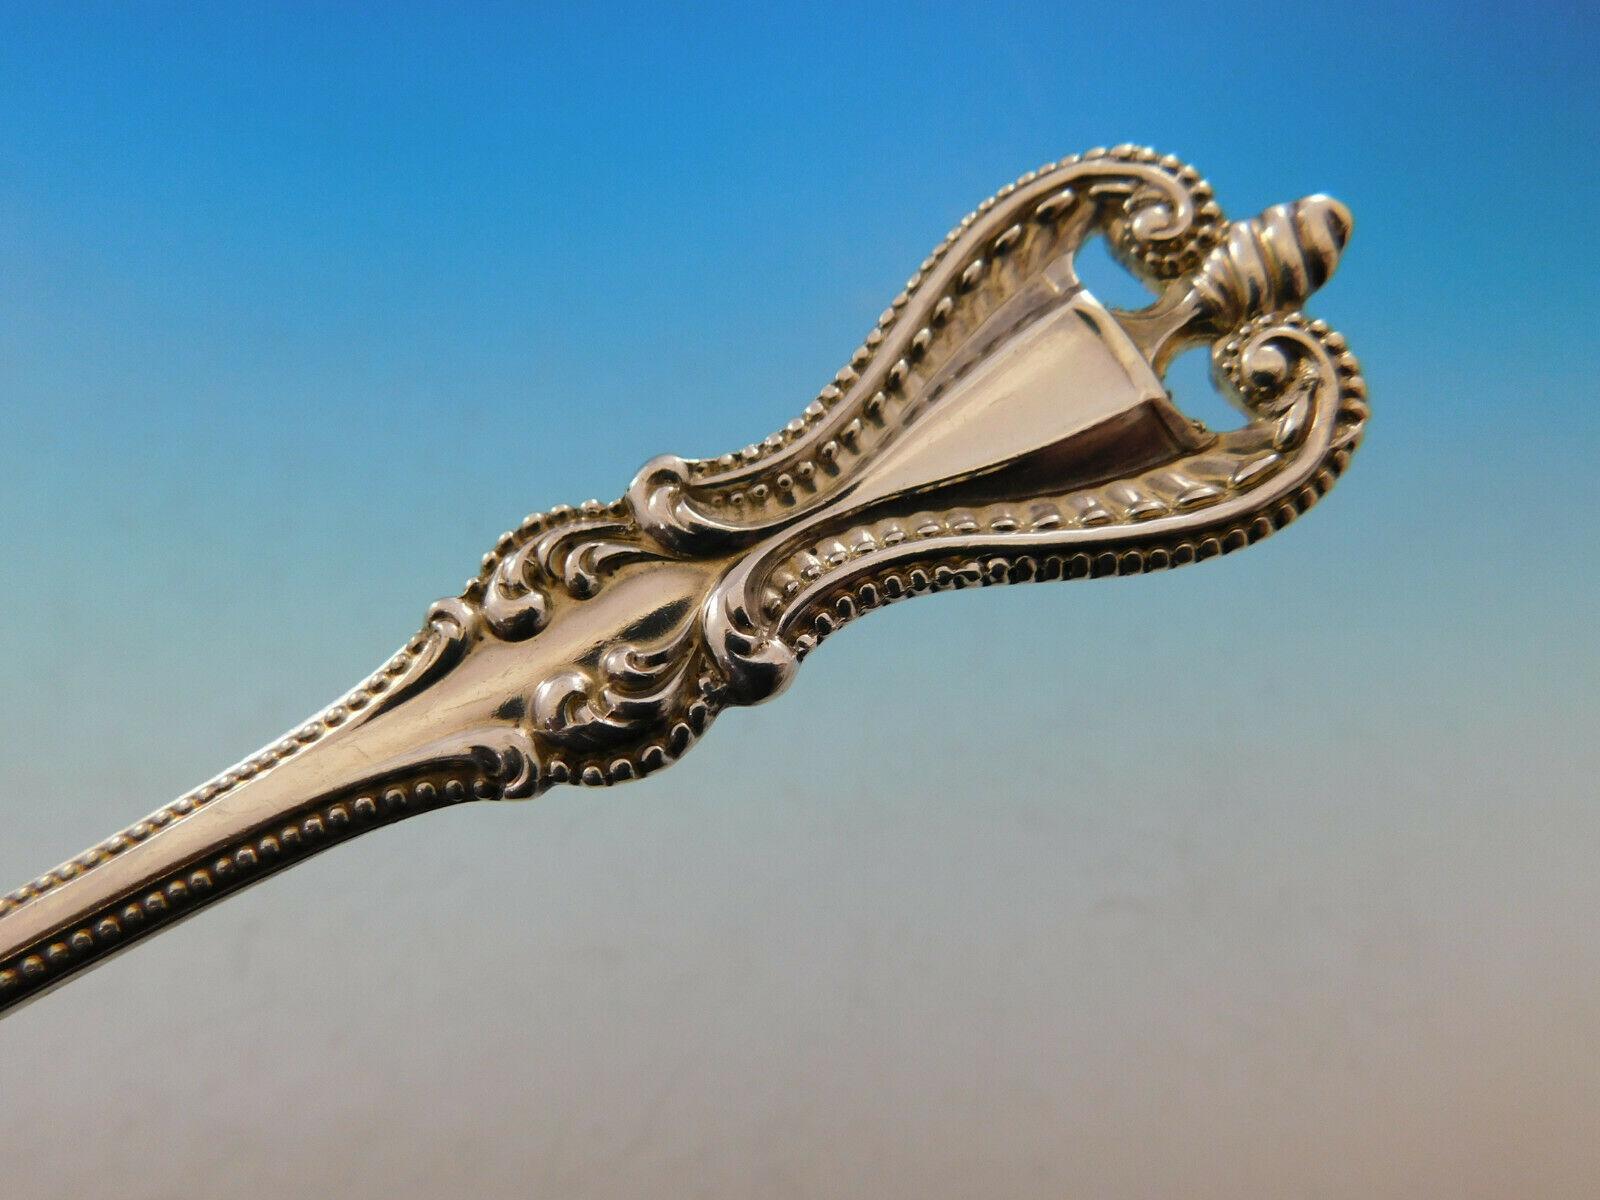 Lavishly decorated, Old Colonial's graceful curves descend along a beaded handle. Representing the height of the silversmith's craft, Old Colonial is a peerless expression of sophistication in sterling.

Monumental dinner size Old Colonial by Towle